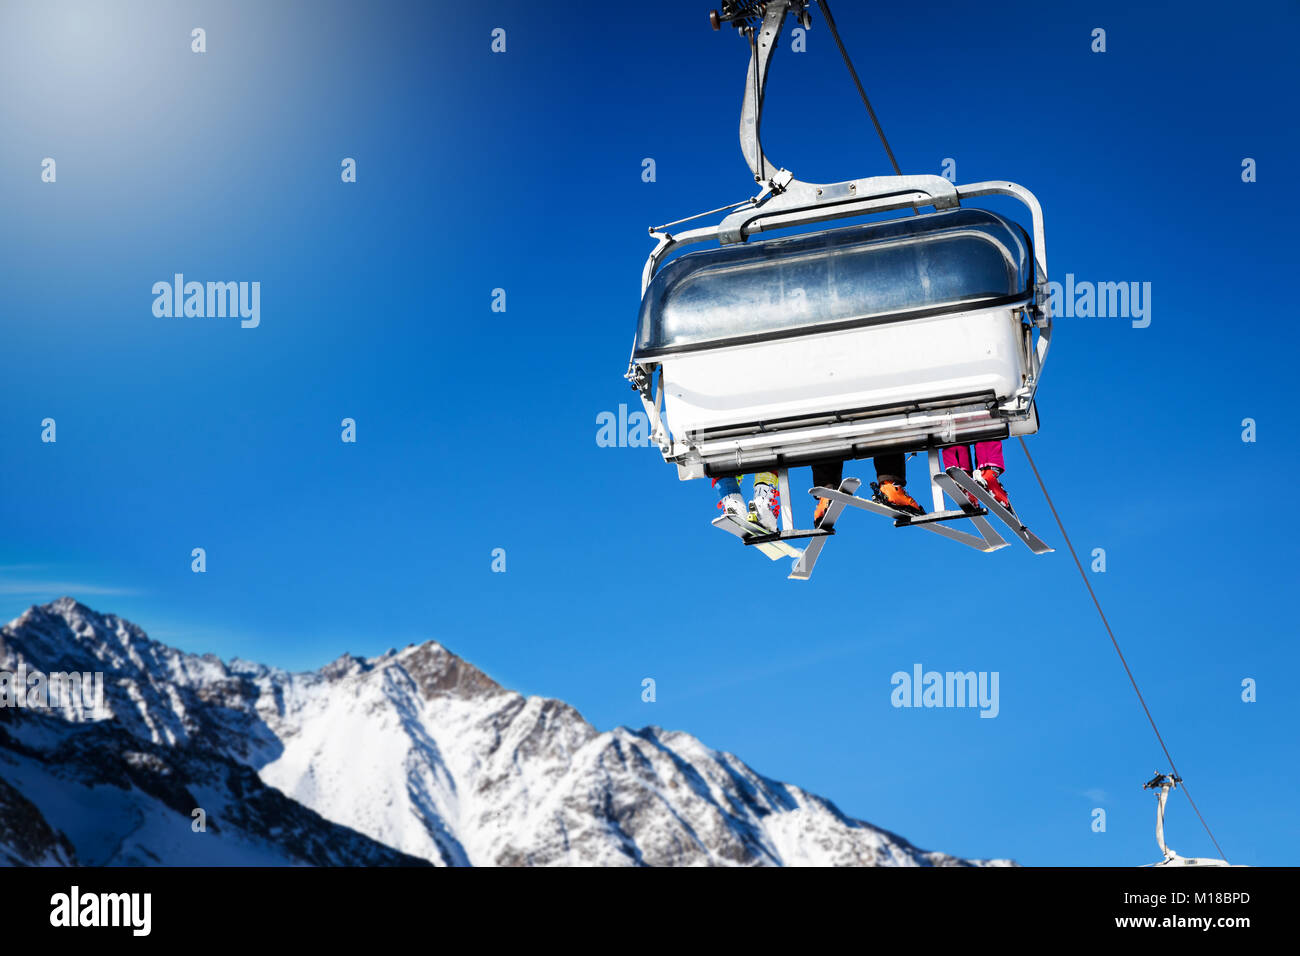 skiers in a chairlift against blue sunny sky at ski resort Stock Photo